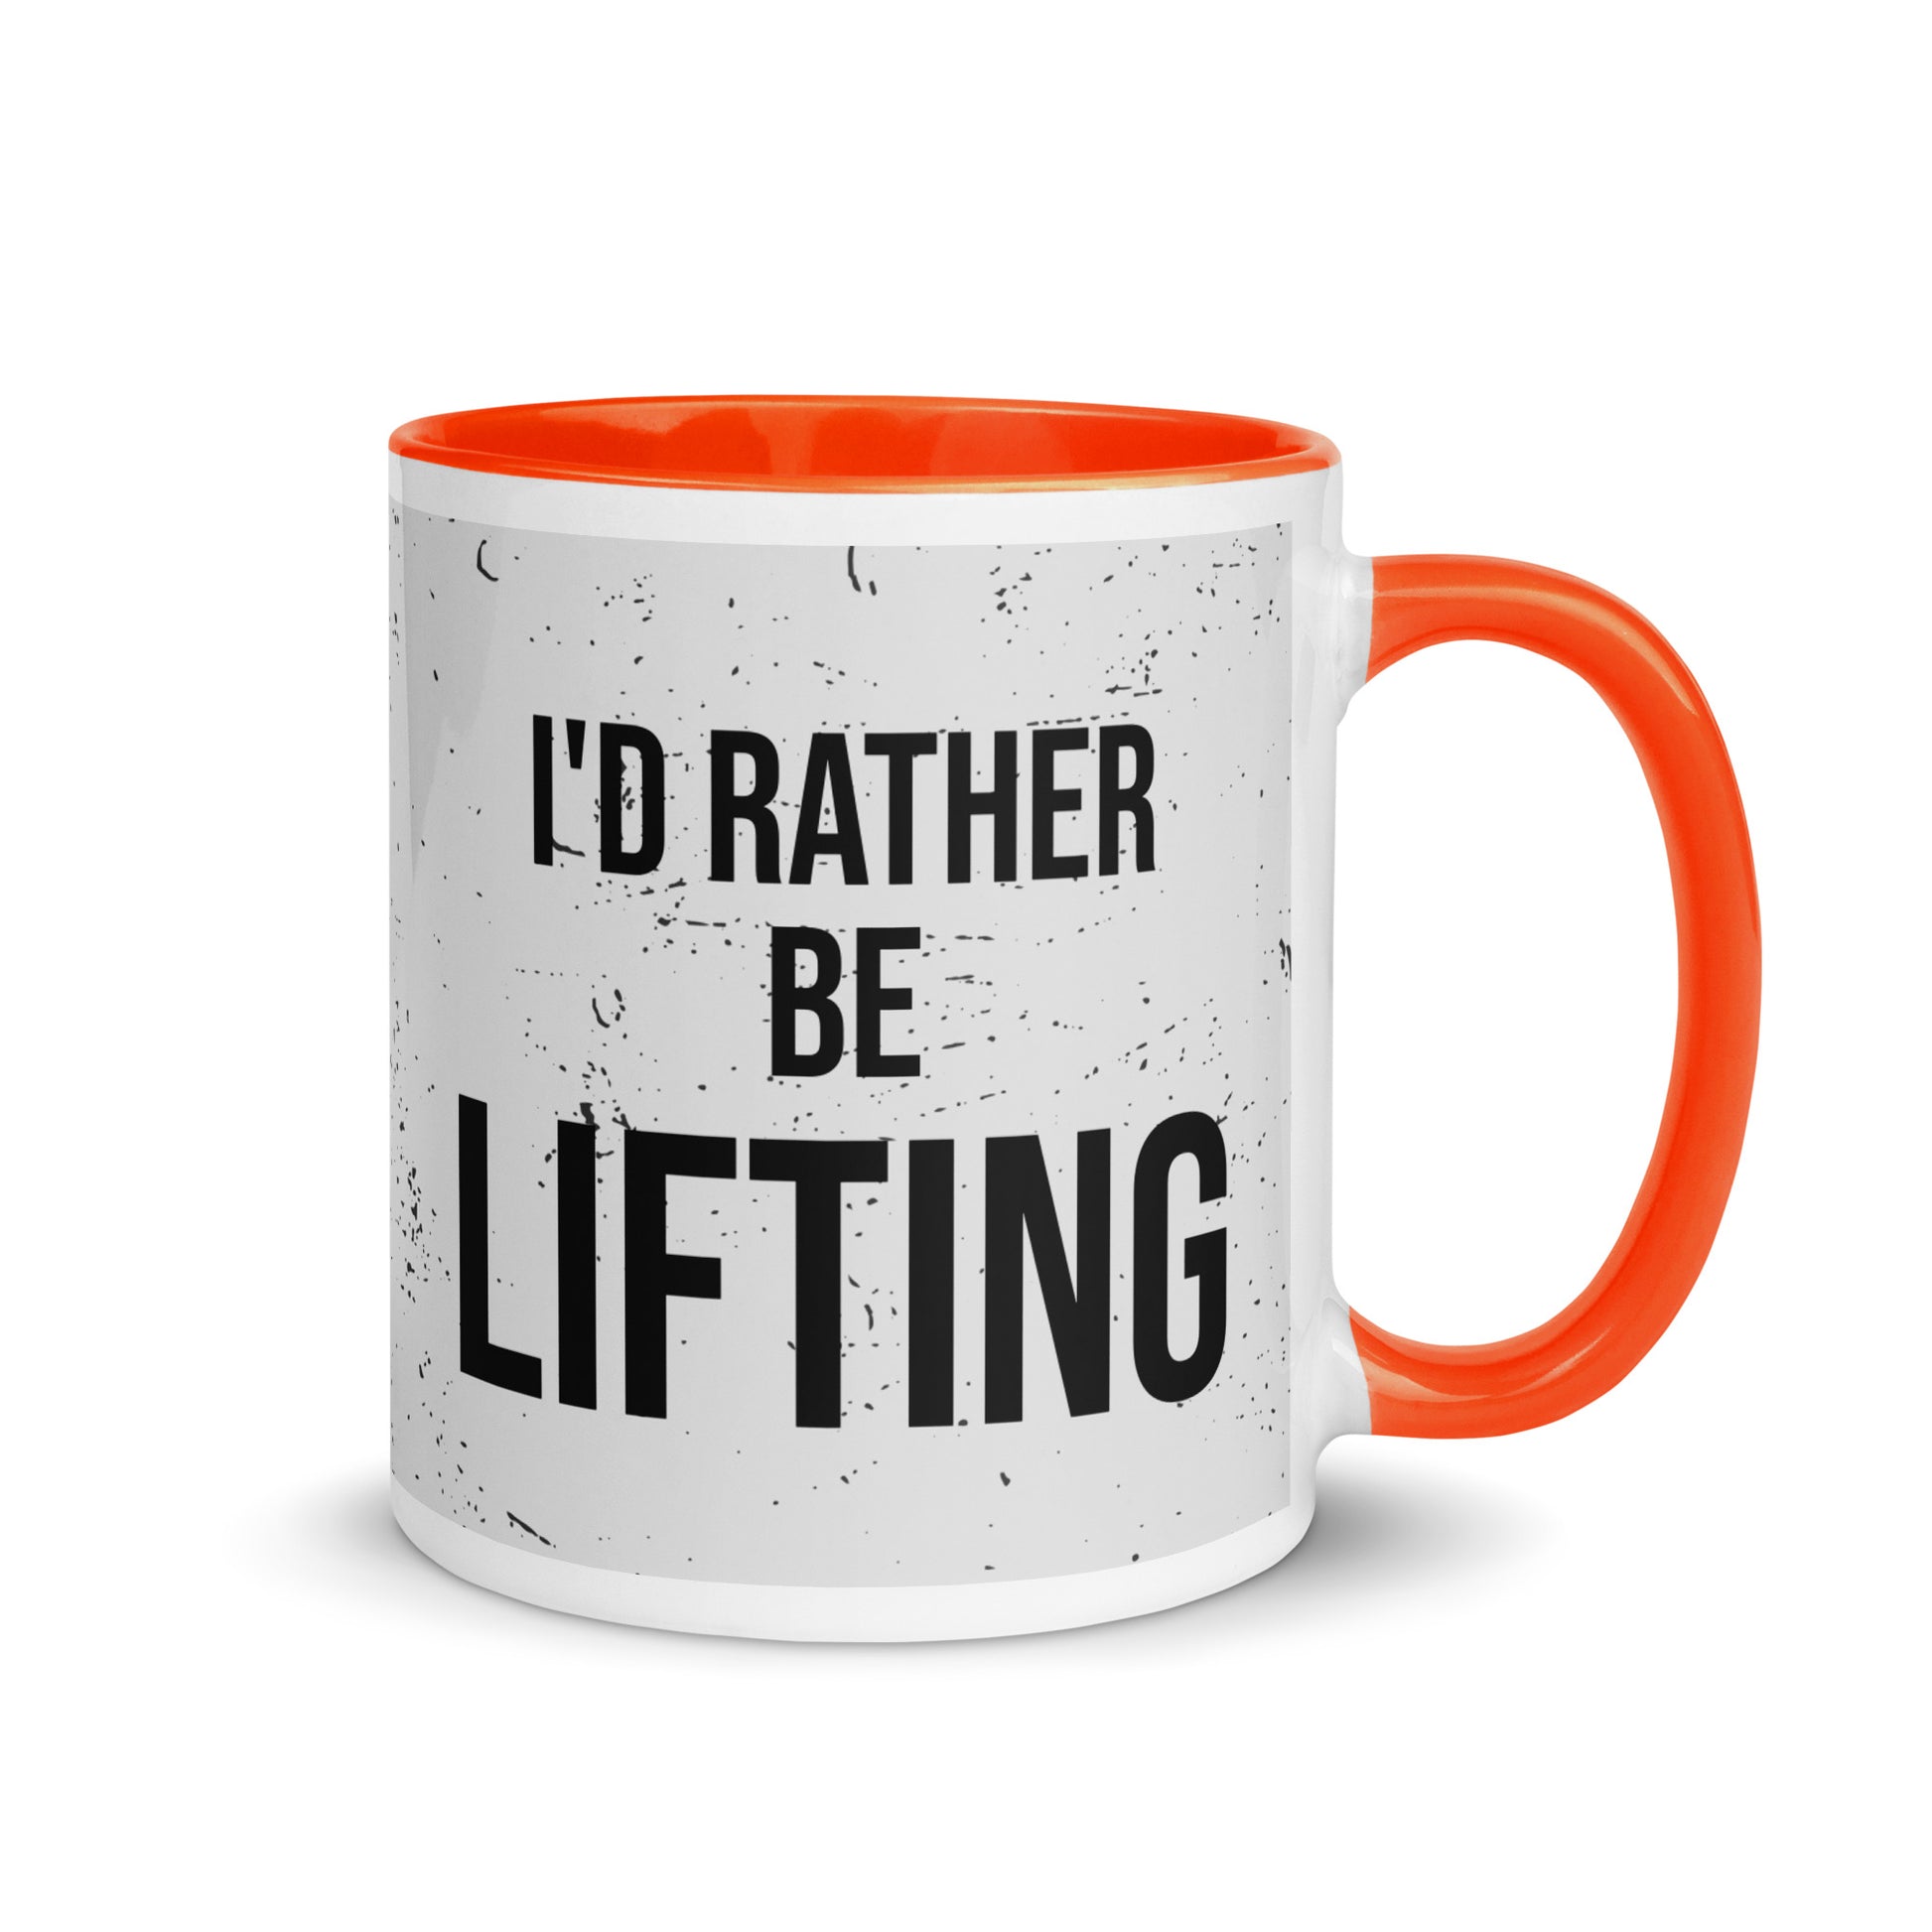 Orange handled mug with I'd rather be lifting written on it, across a grey splatter background. A gift for someone who loves the gym.